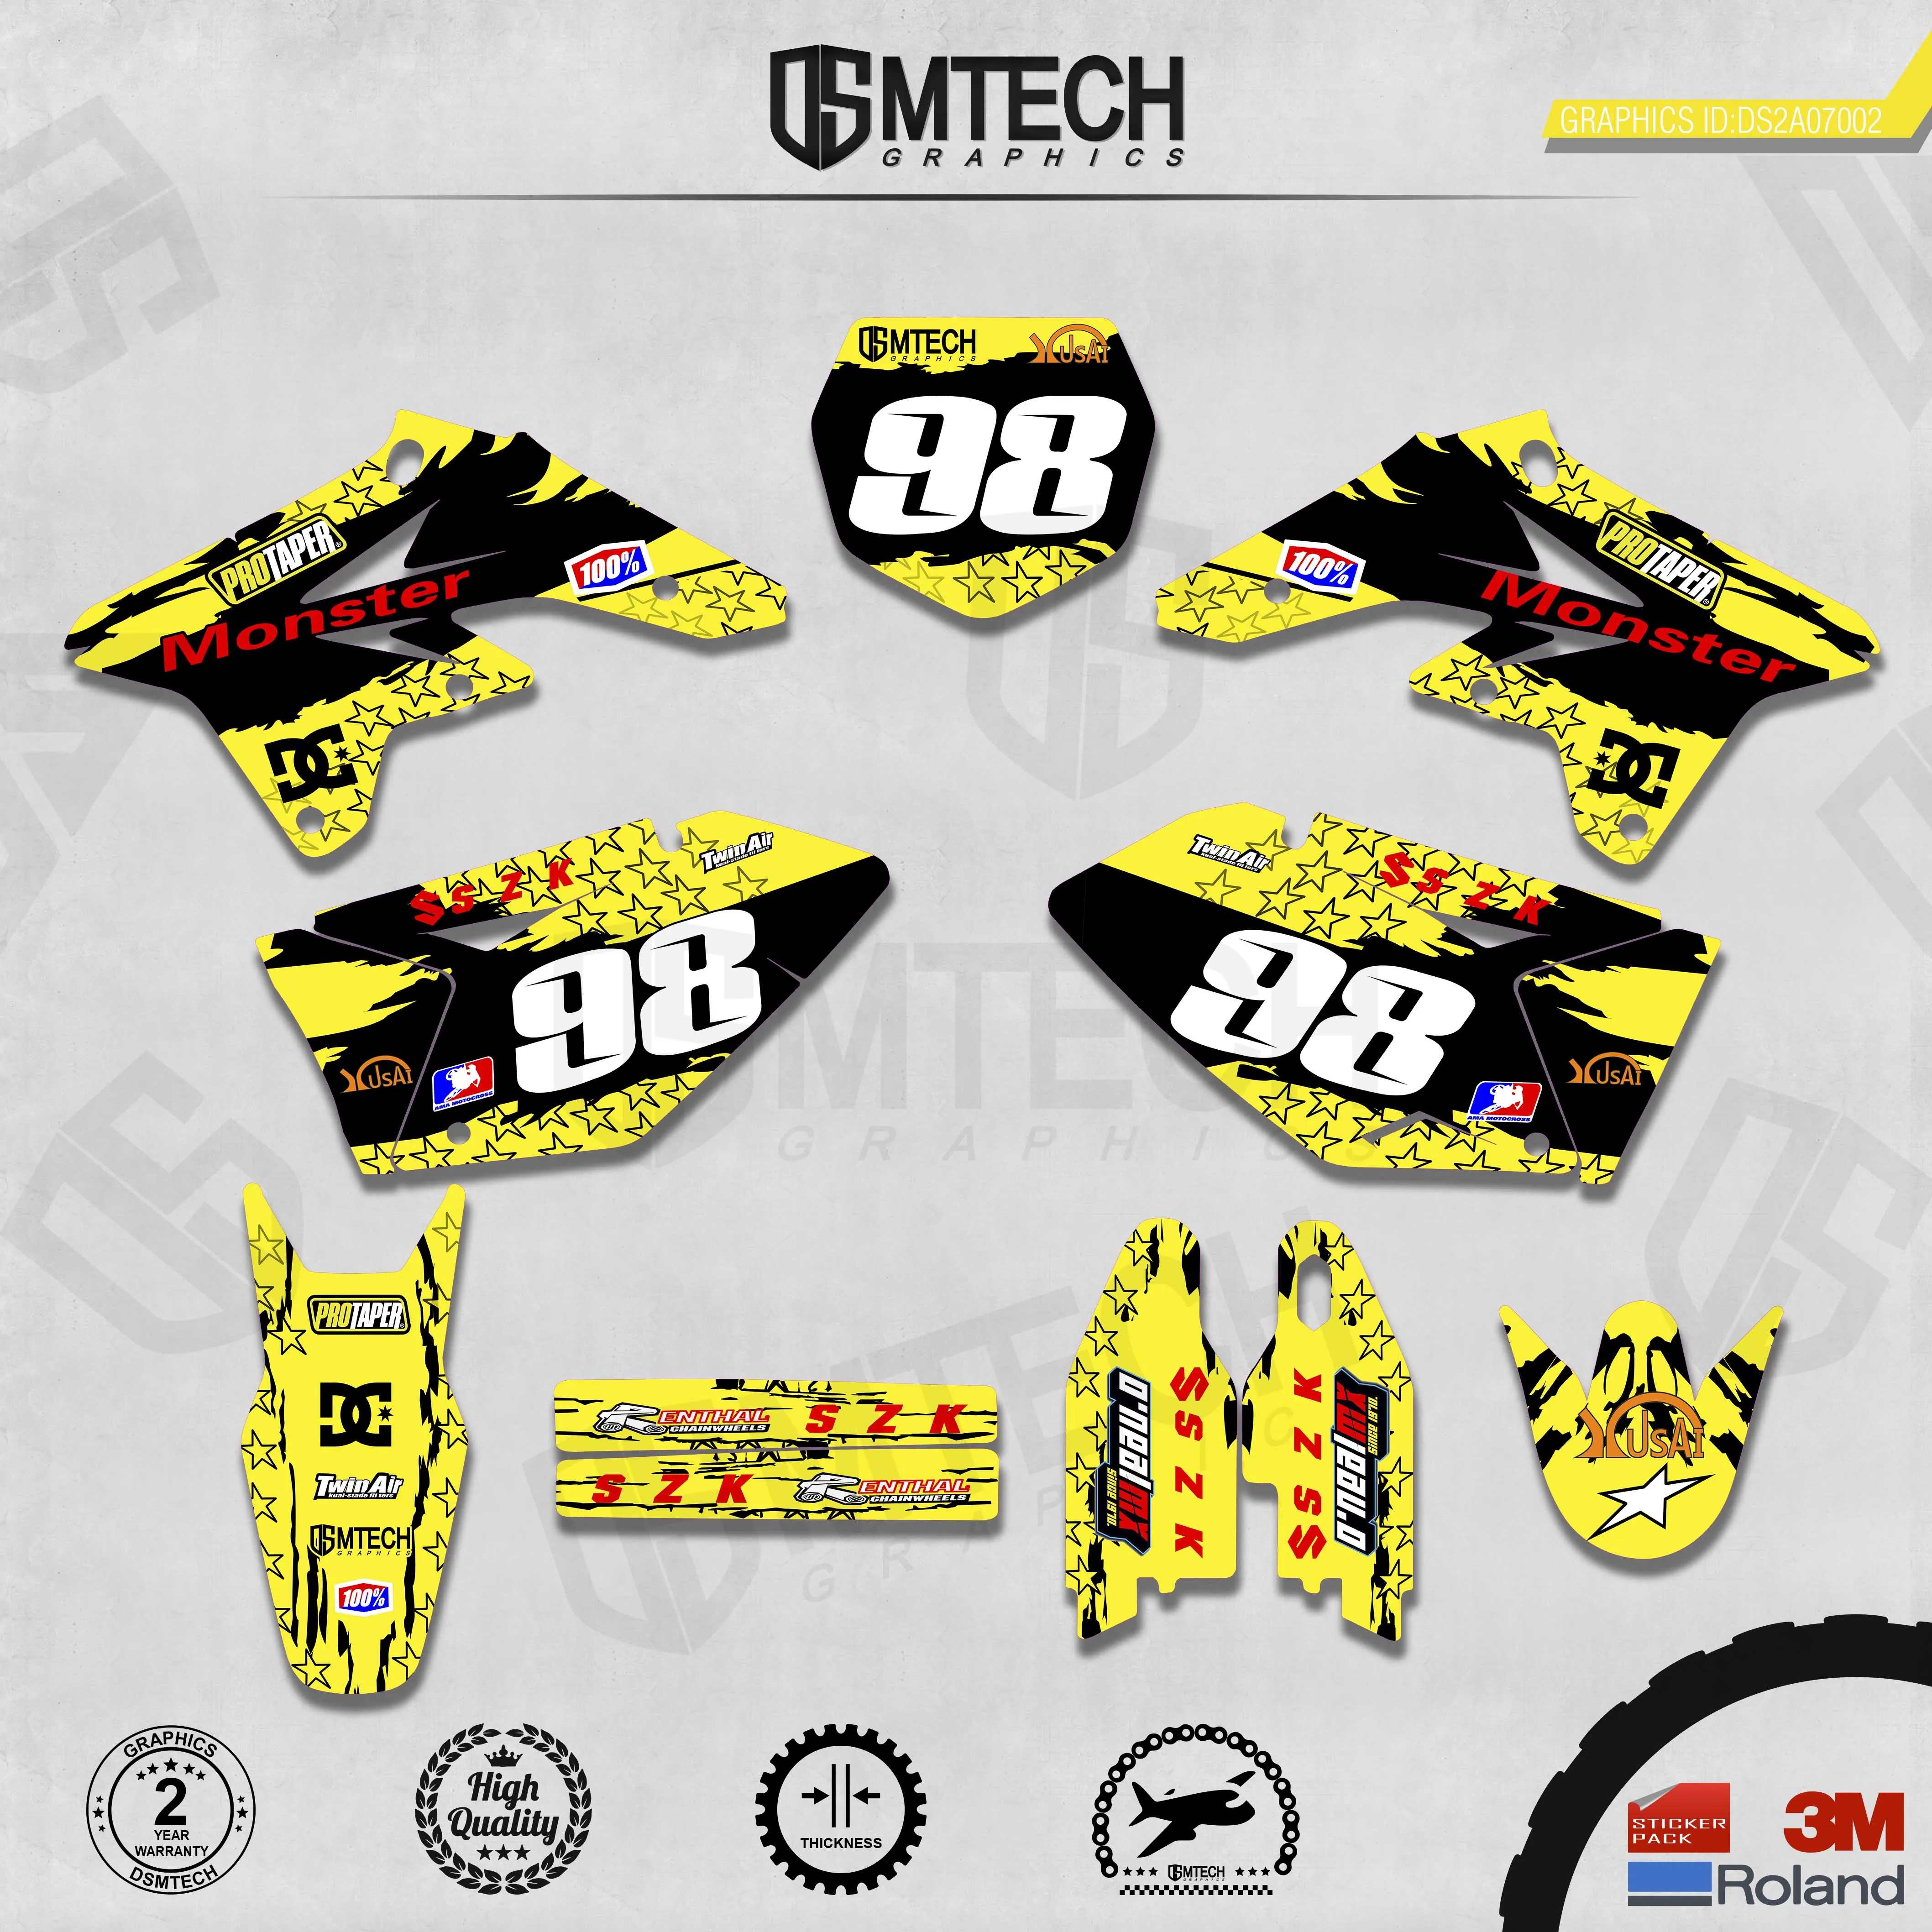 DSMTECH Customized Team Graphics Backgrounds Decals 3M Custom Stickers For 2007-2009 RMZ250  002